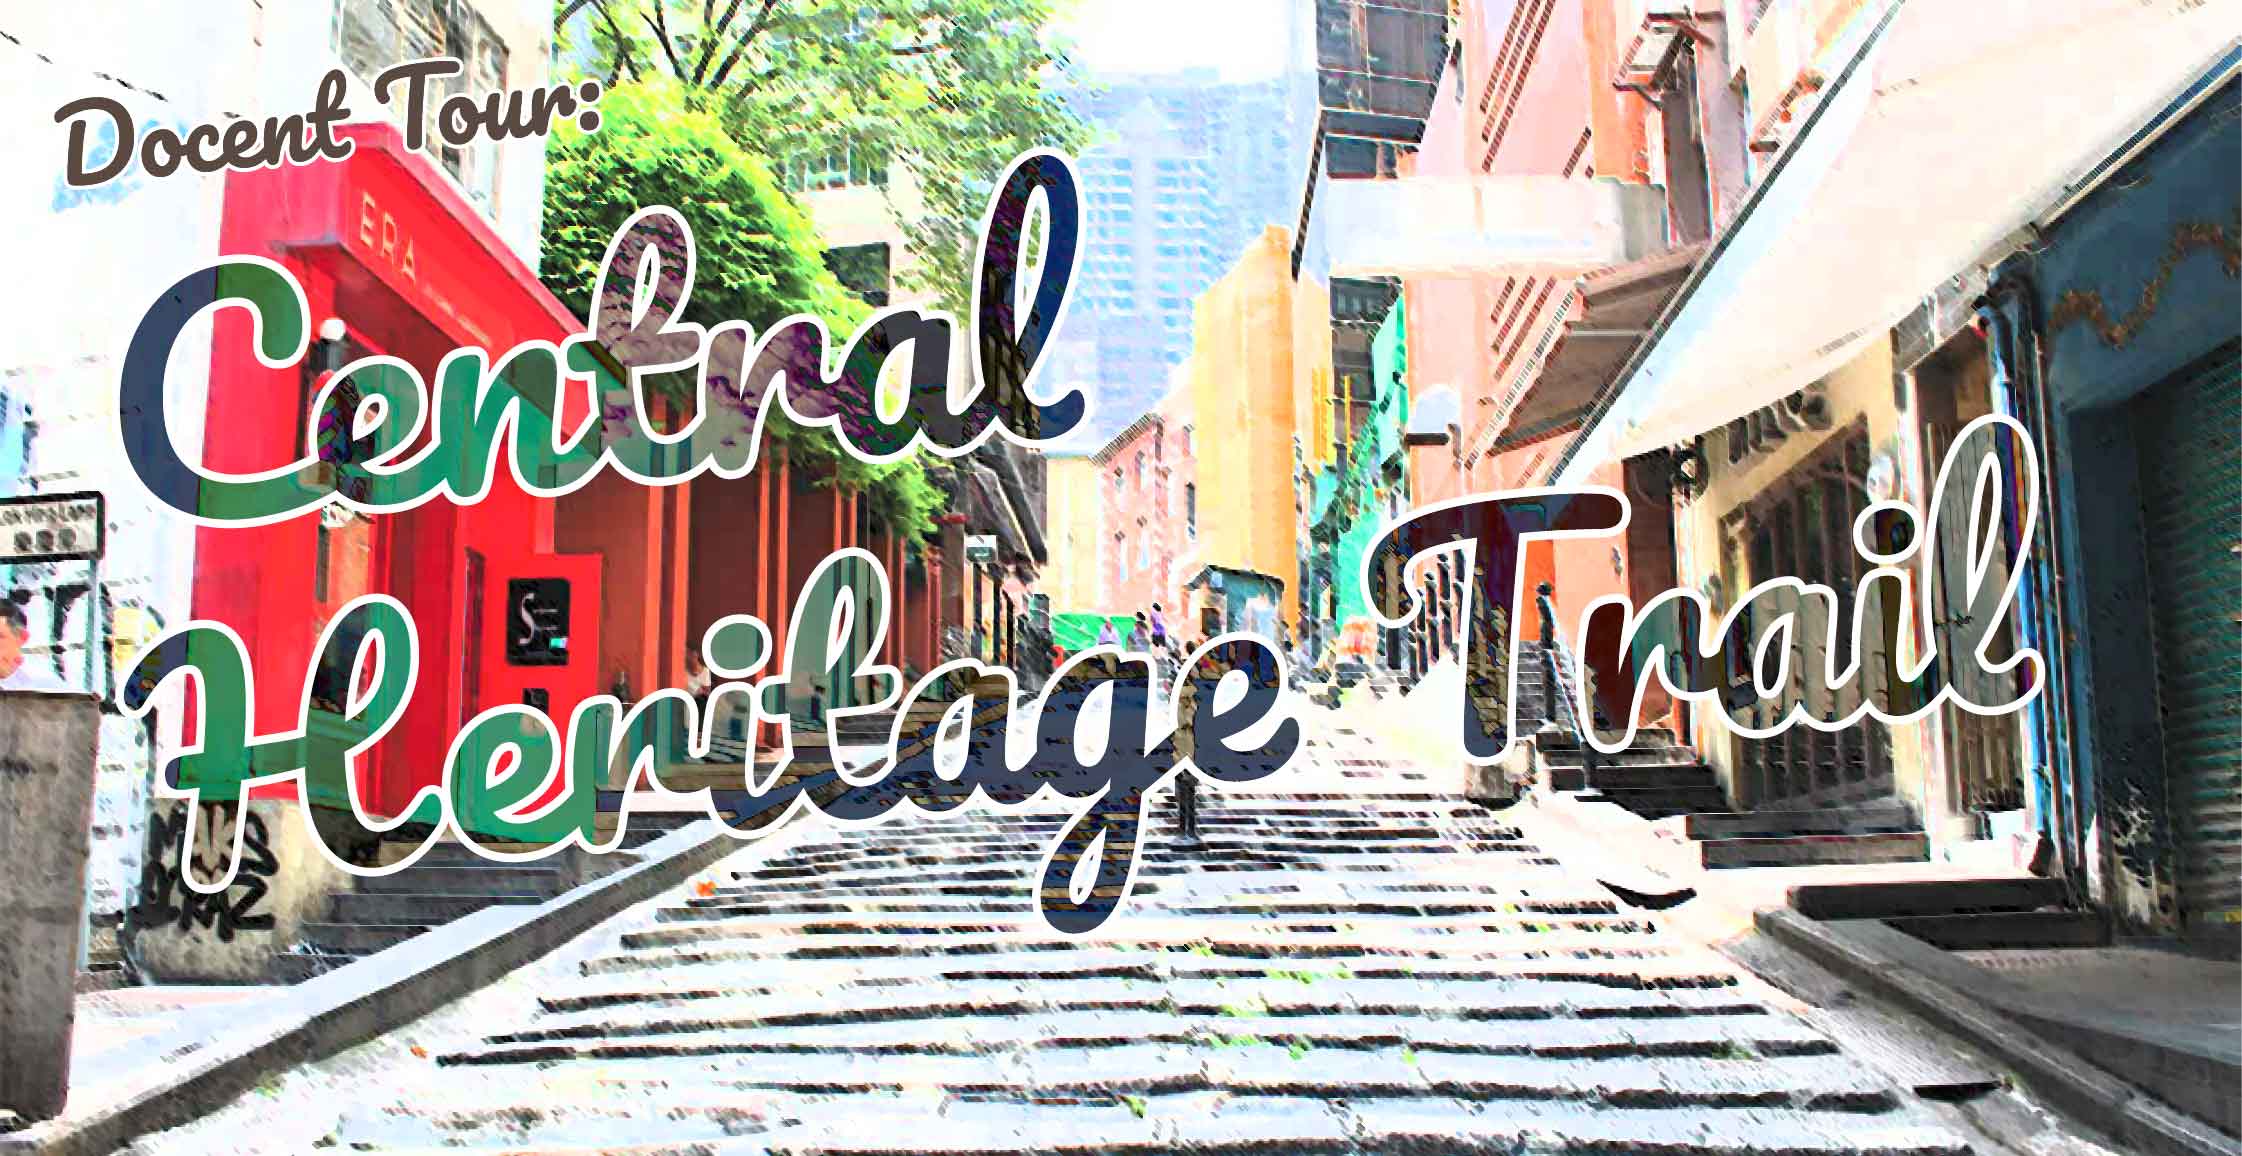 Central Heritage Trail